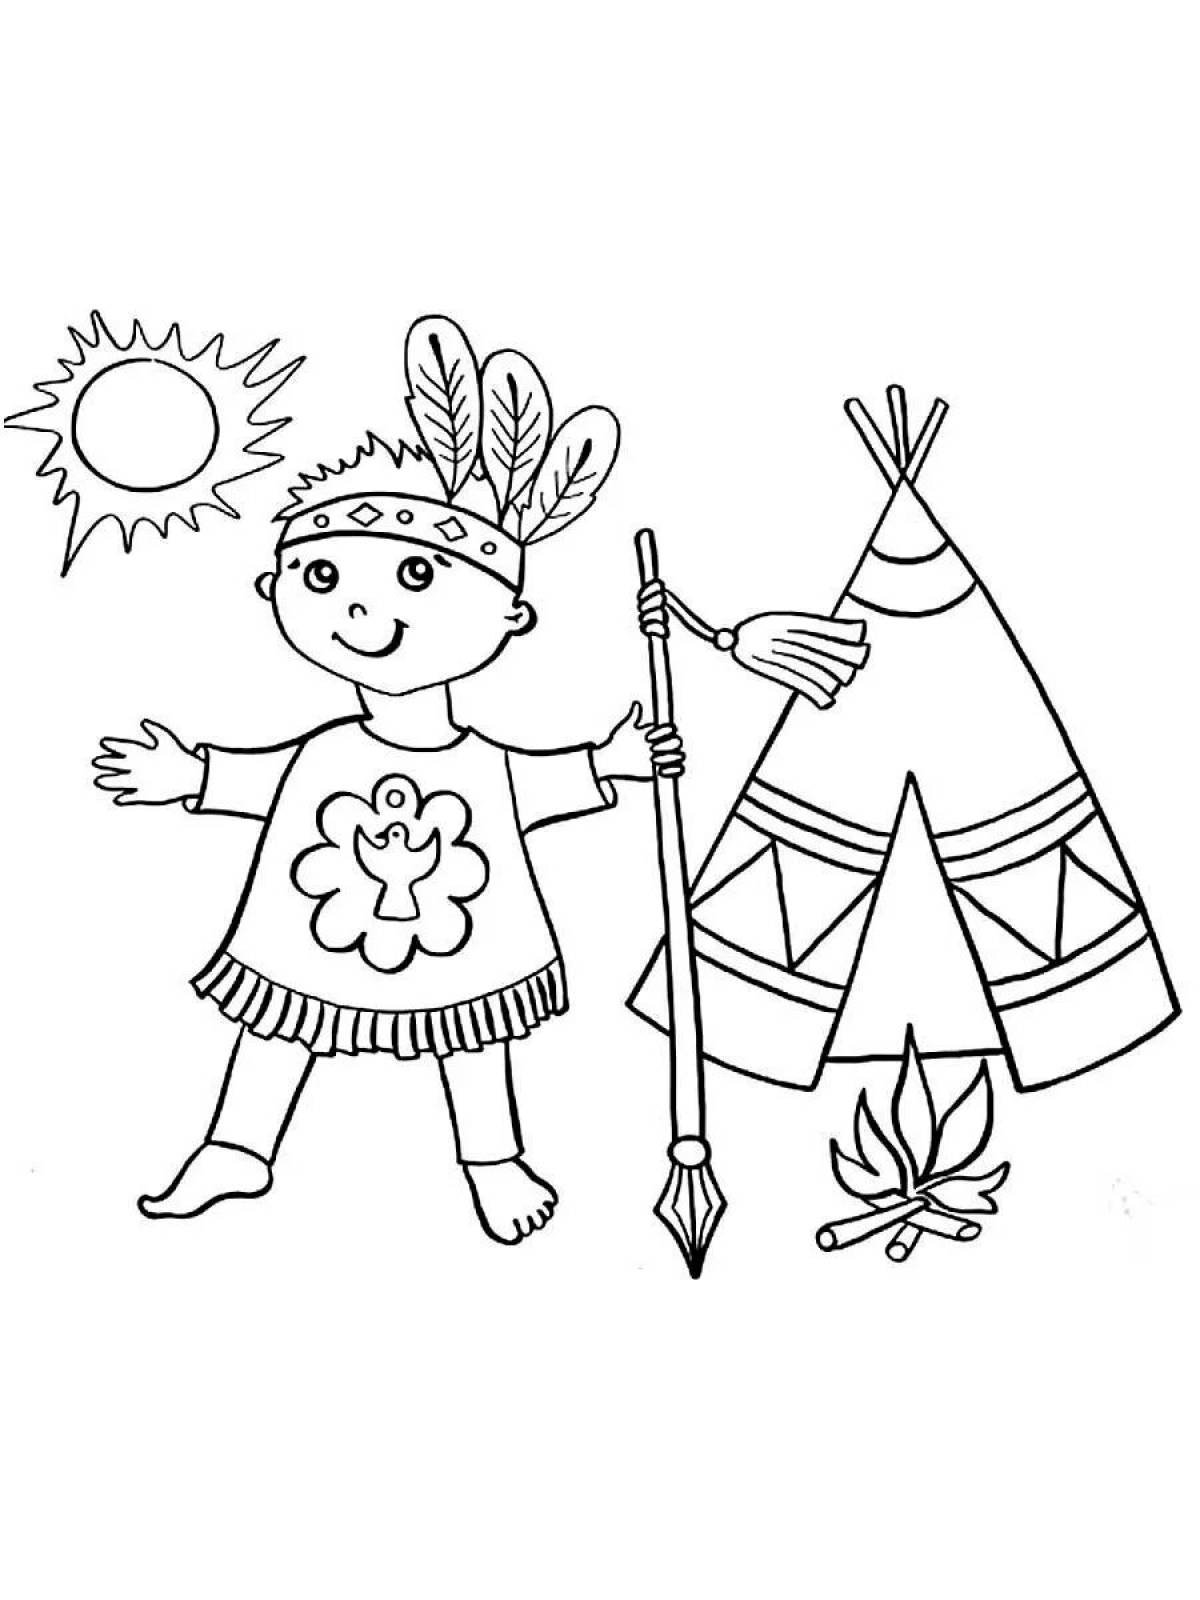 Great Sami coloring book for kids